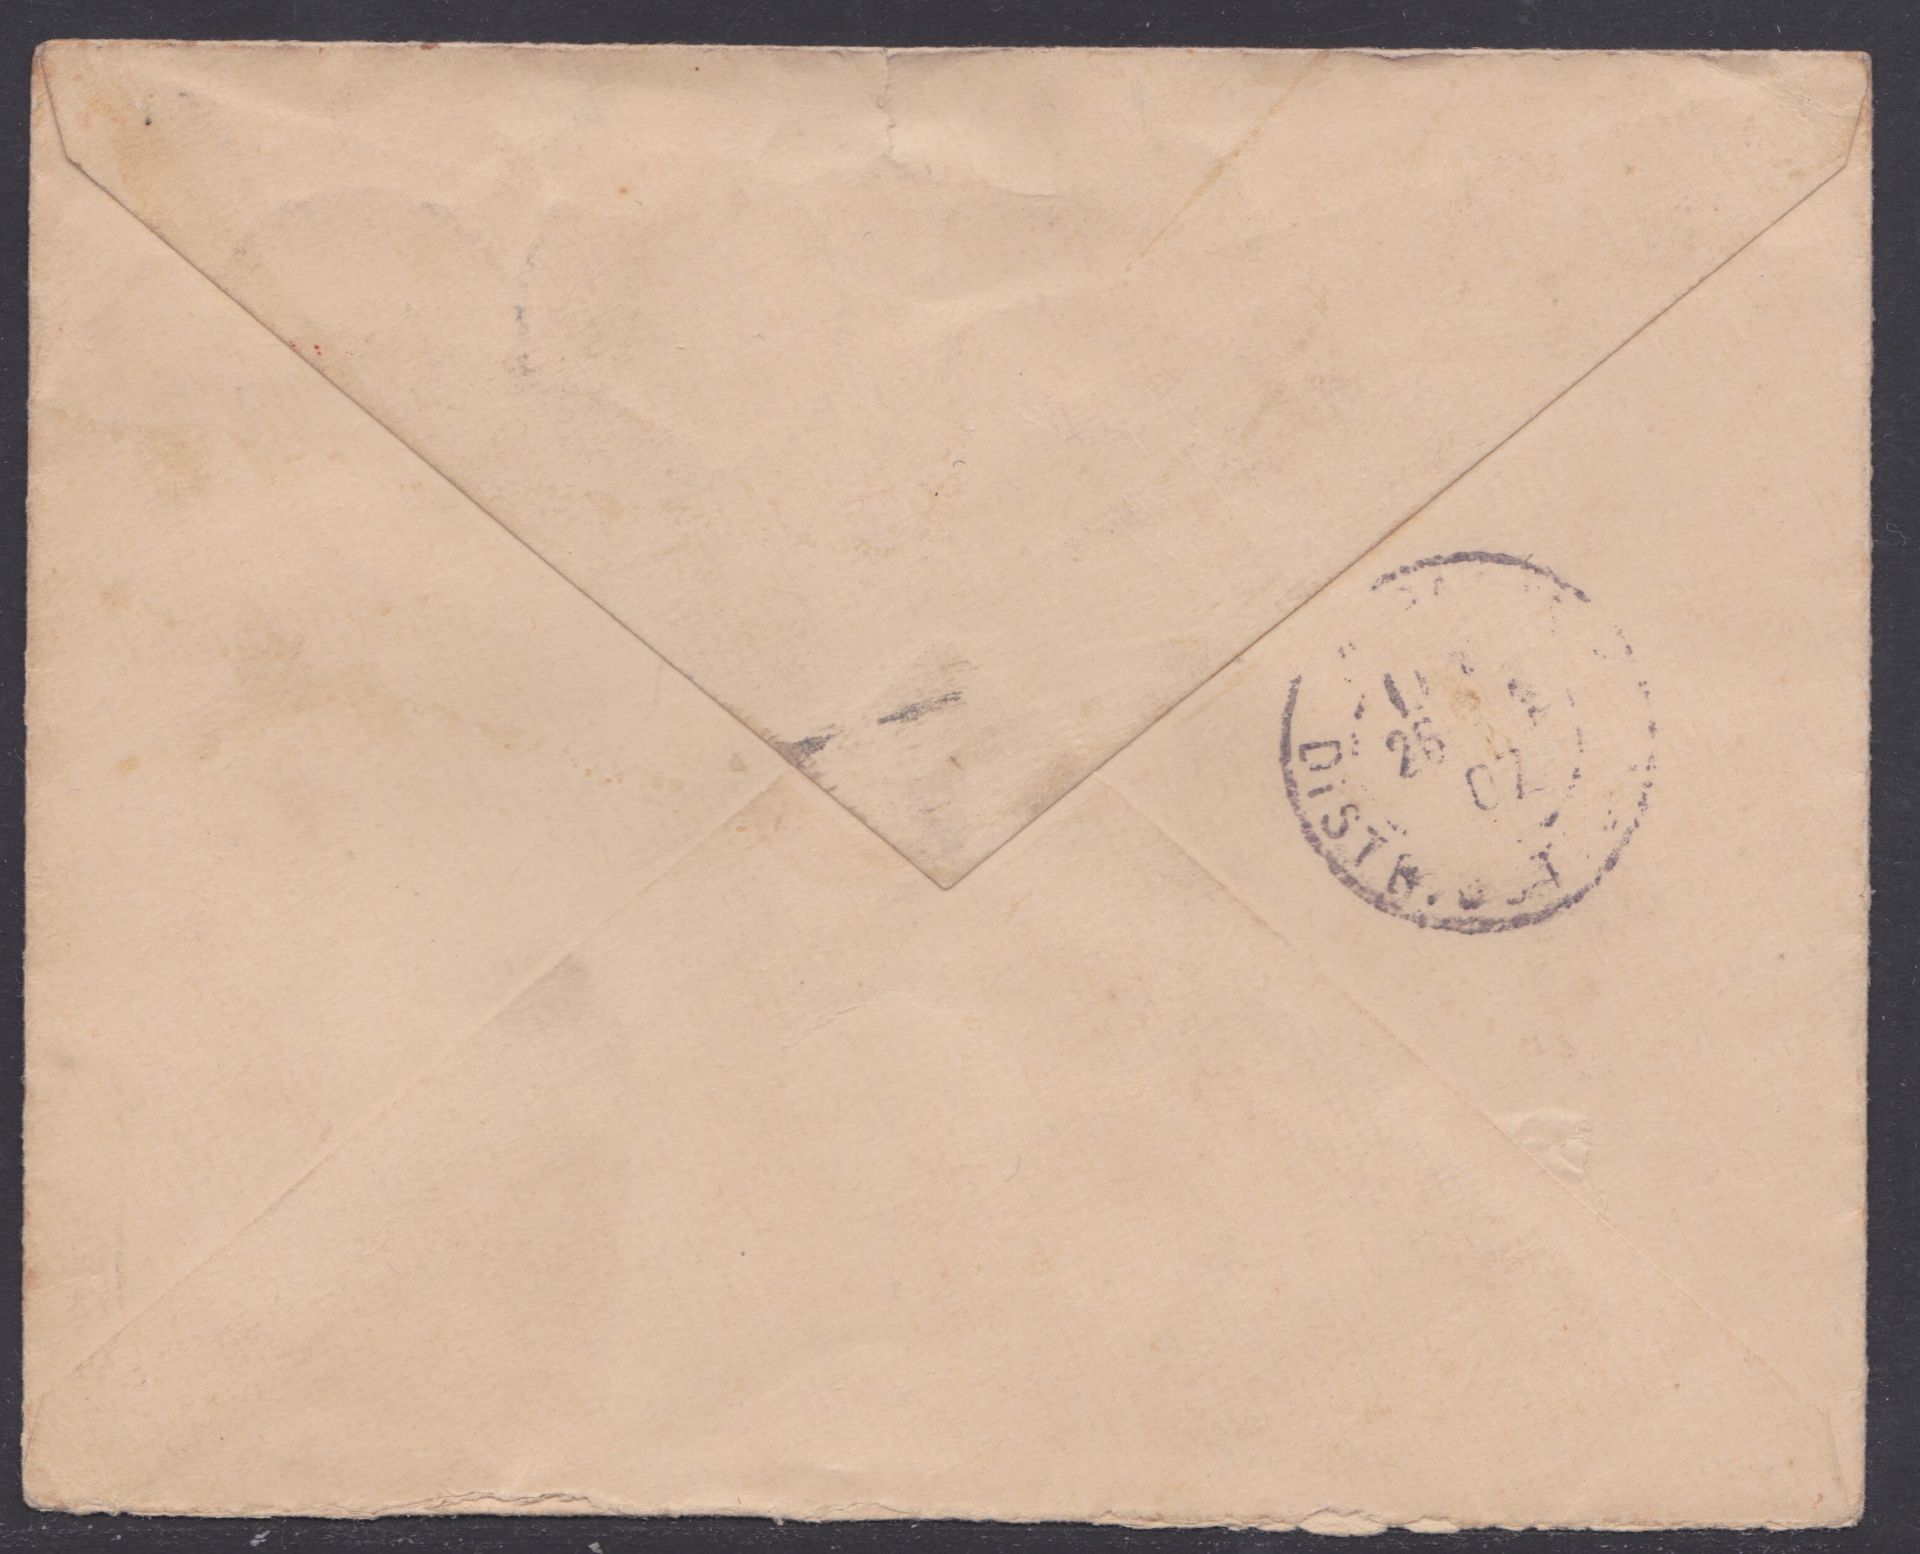 MAURITIUS 1907 - Registered 4c on 36c postal stationery envelope sent from Curepipe to France, - Image 2 of 2